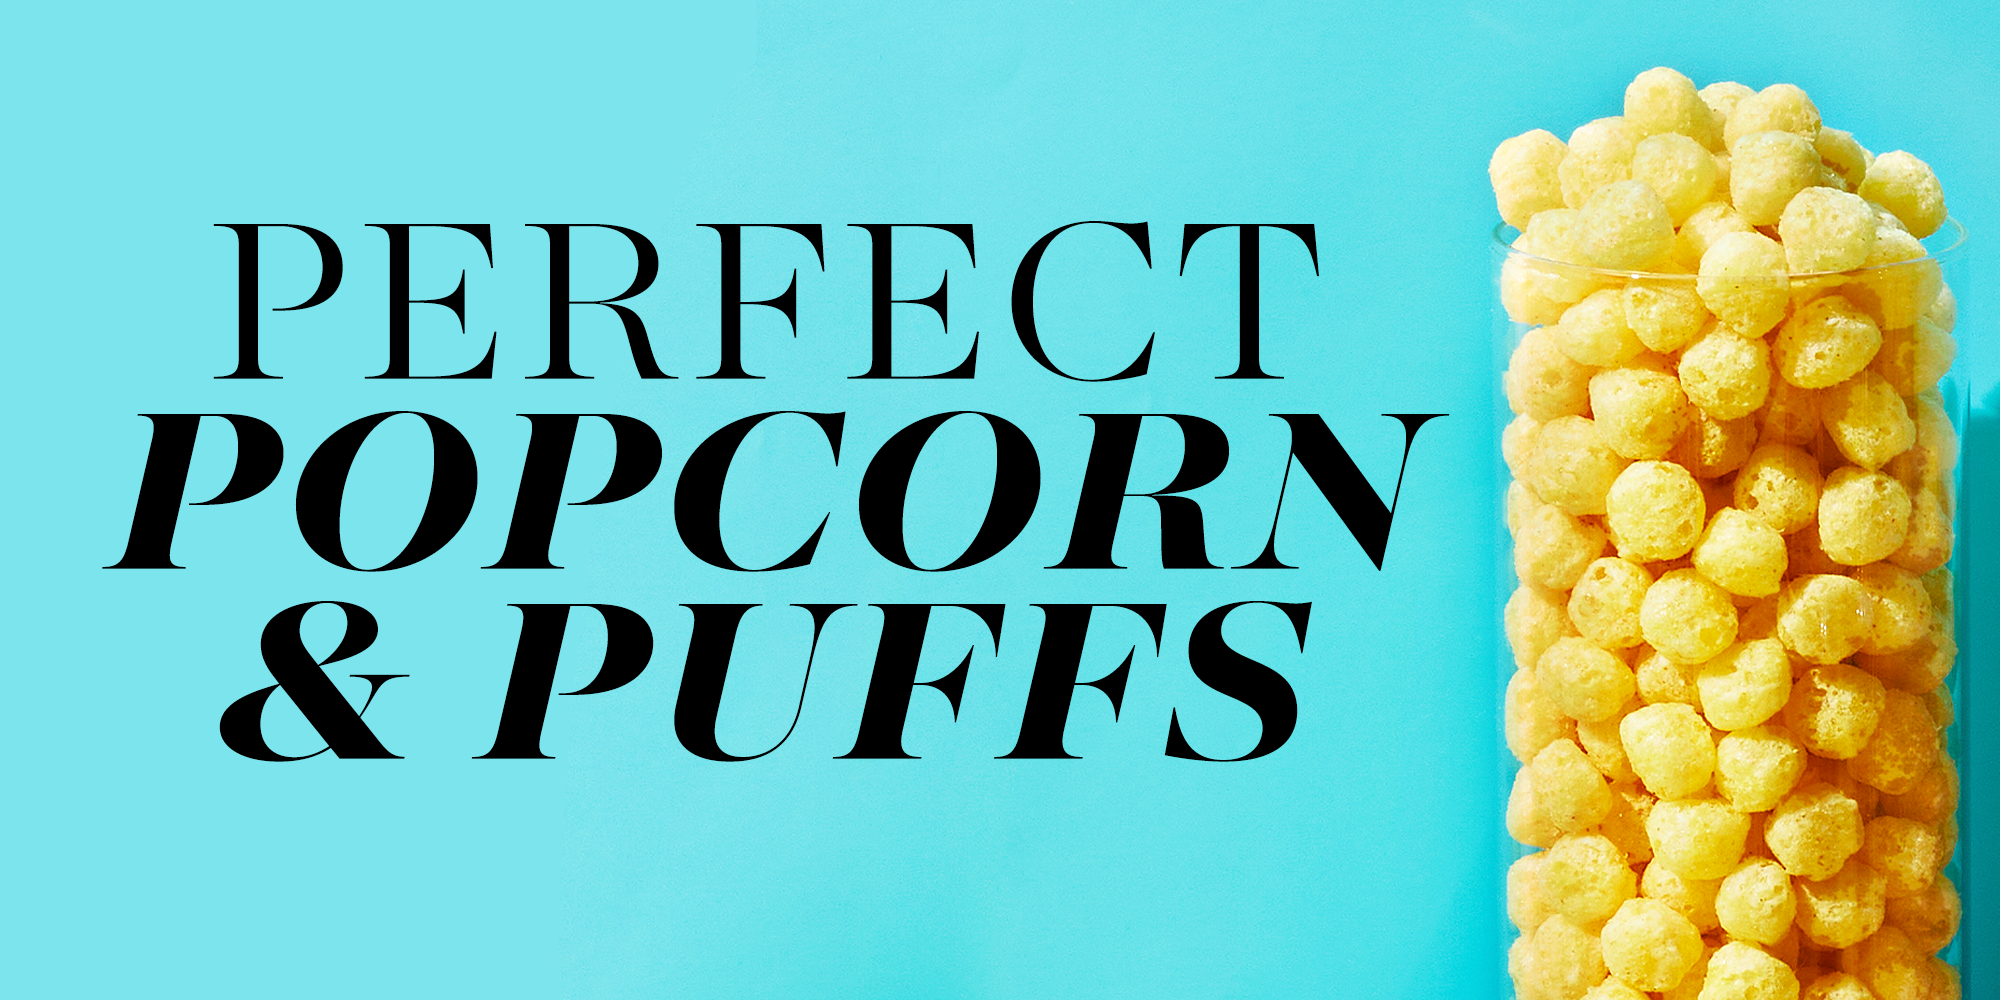 perfect popcorn and puffs